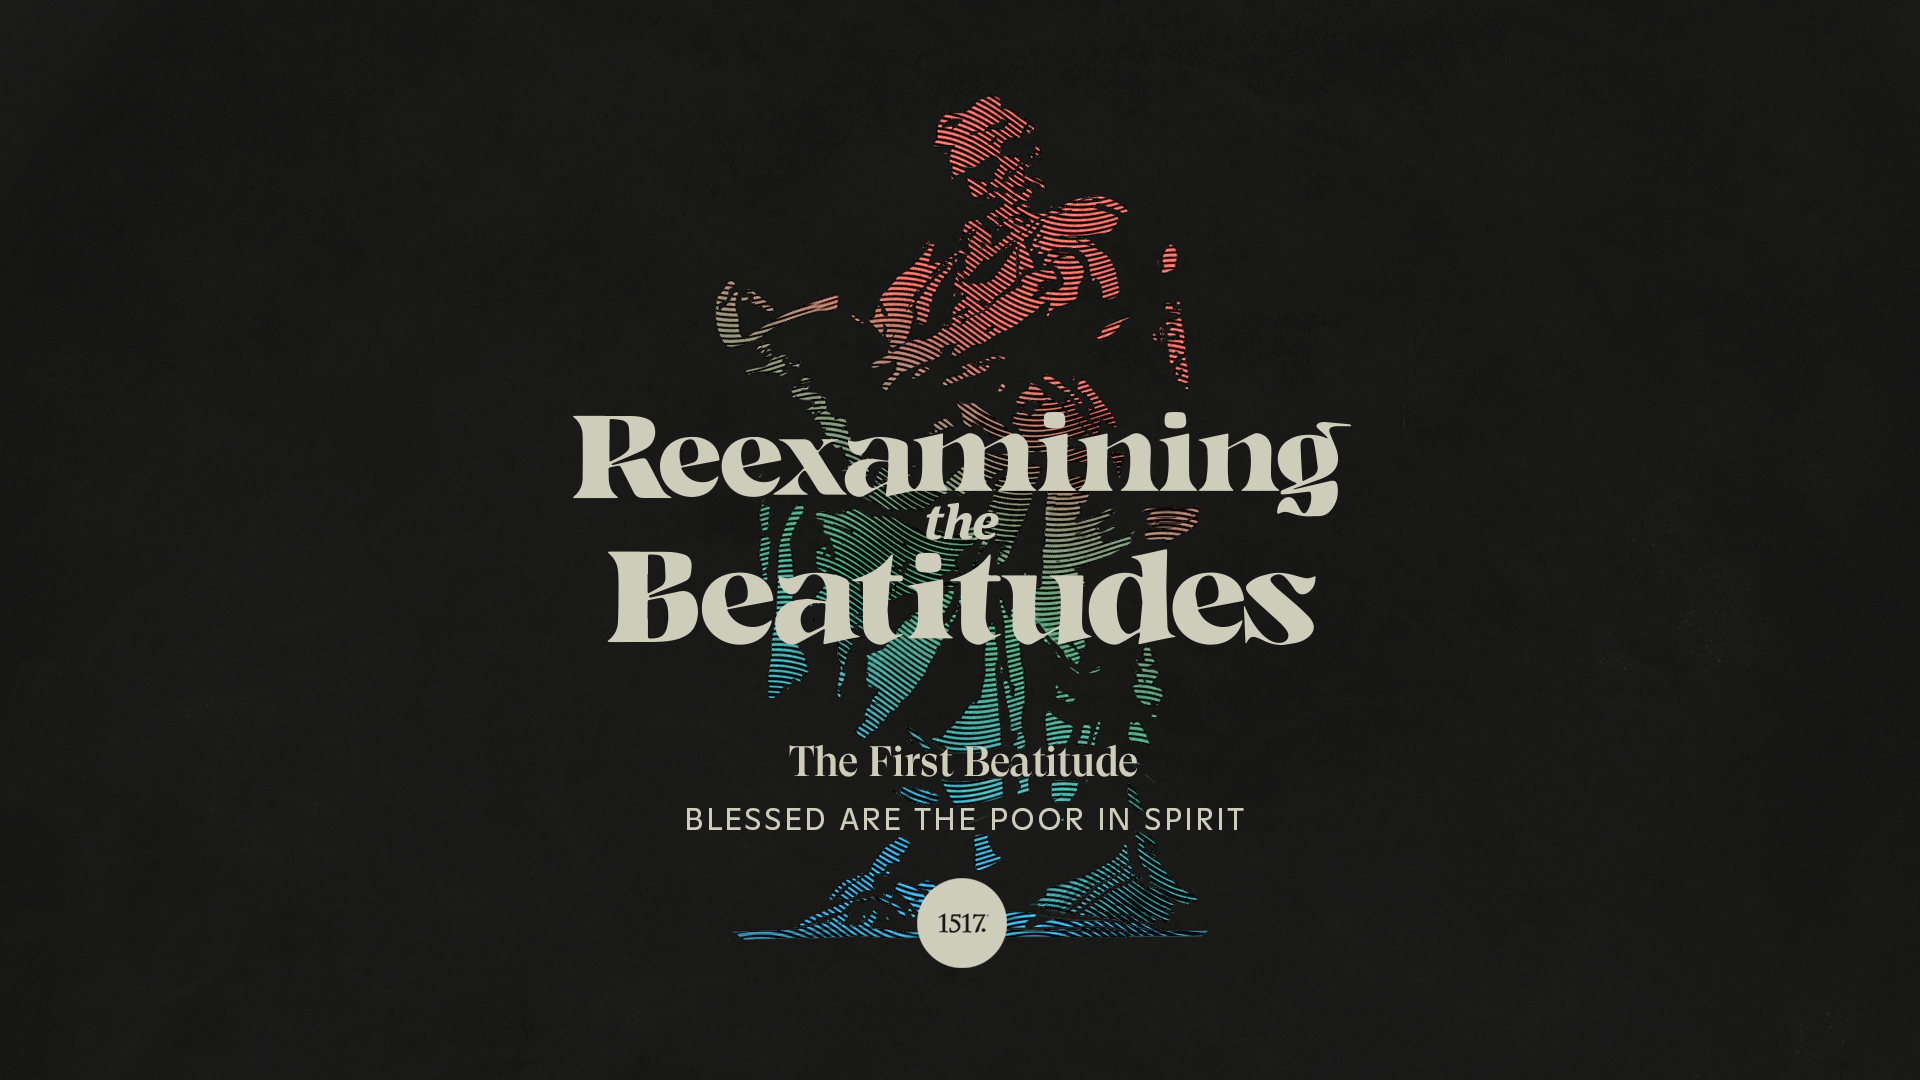 The Second Beatitude: From Tears to Joy